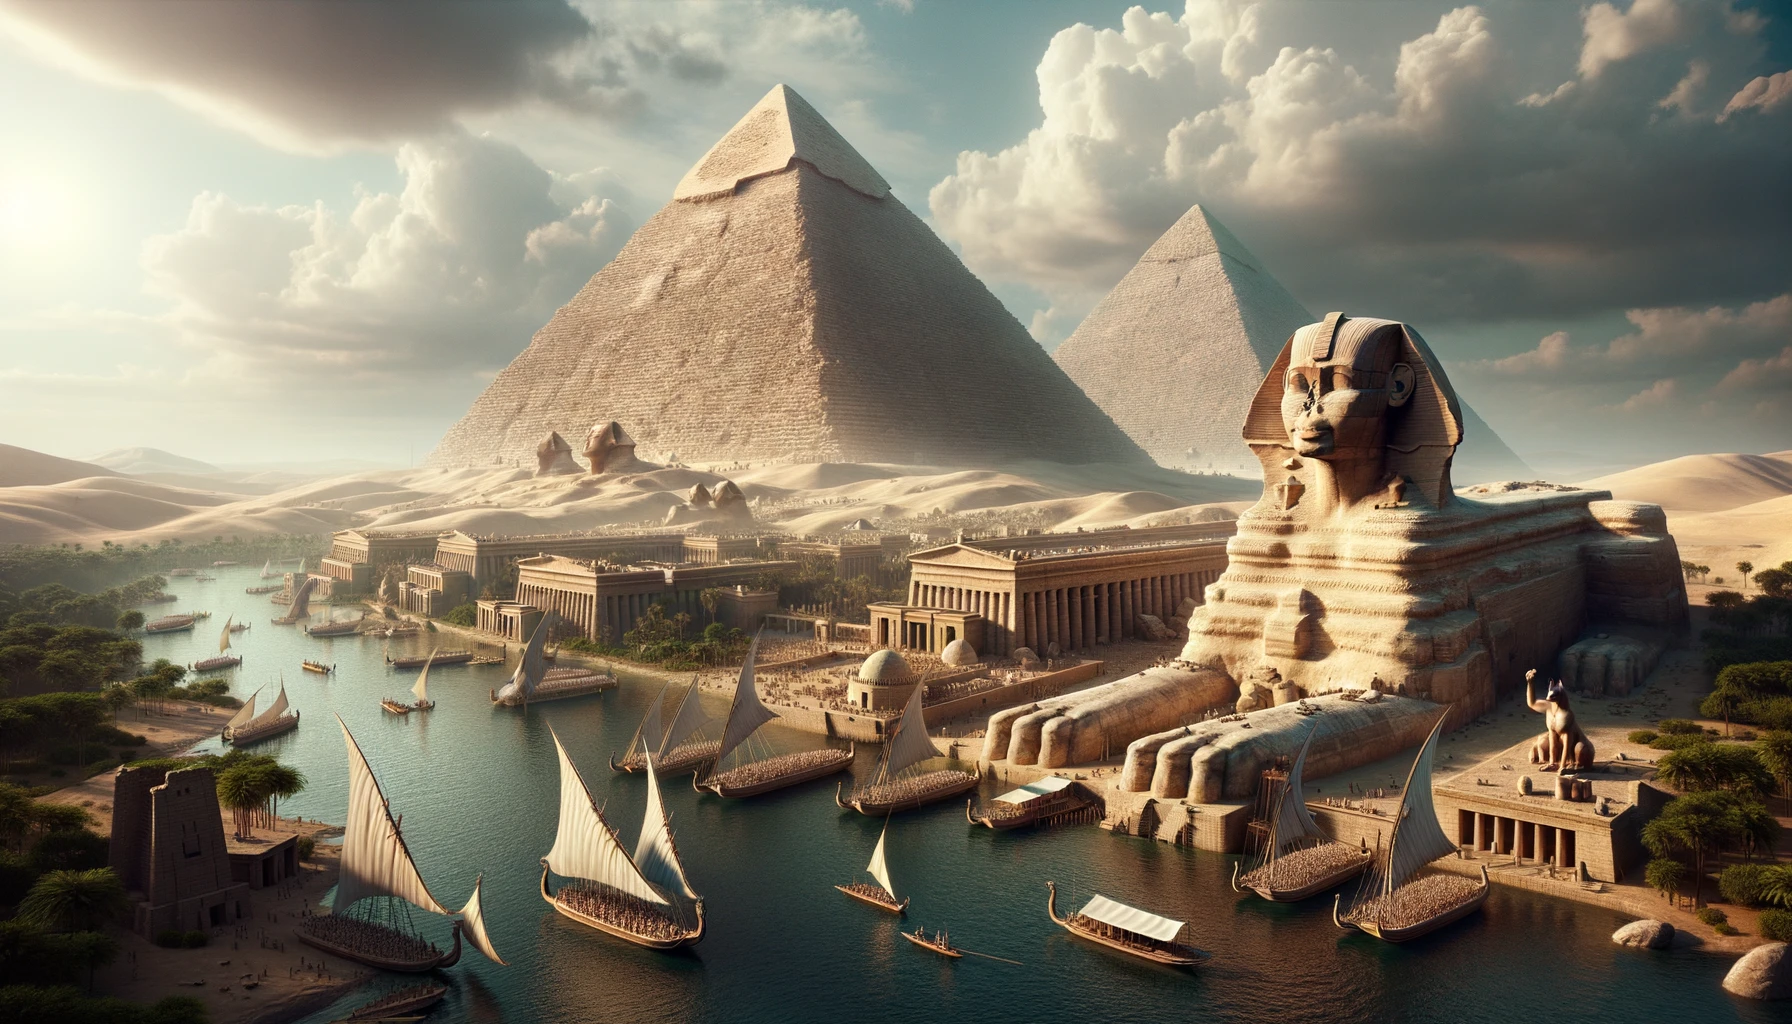 Digital render of ancient Egypt in its prime. The pyramids, with their limestone-clad exteriors, glisten in the sunlight. Adjacent to them, a majestic sphinx, intricately carved, seems to tell tales of bygone eras. The Nile River, a source of sustenance and trade, flows gracefully, its waters sparkling. Boats of various sizes, laden with goods like pottery and grains, navigate the river, showcasing the bustling trade activities of the time.